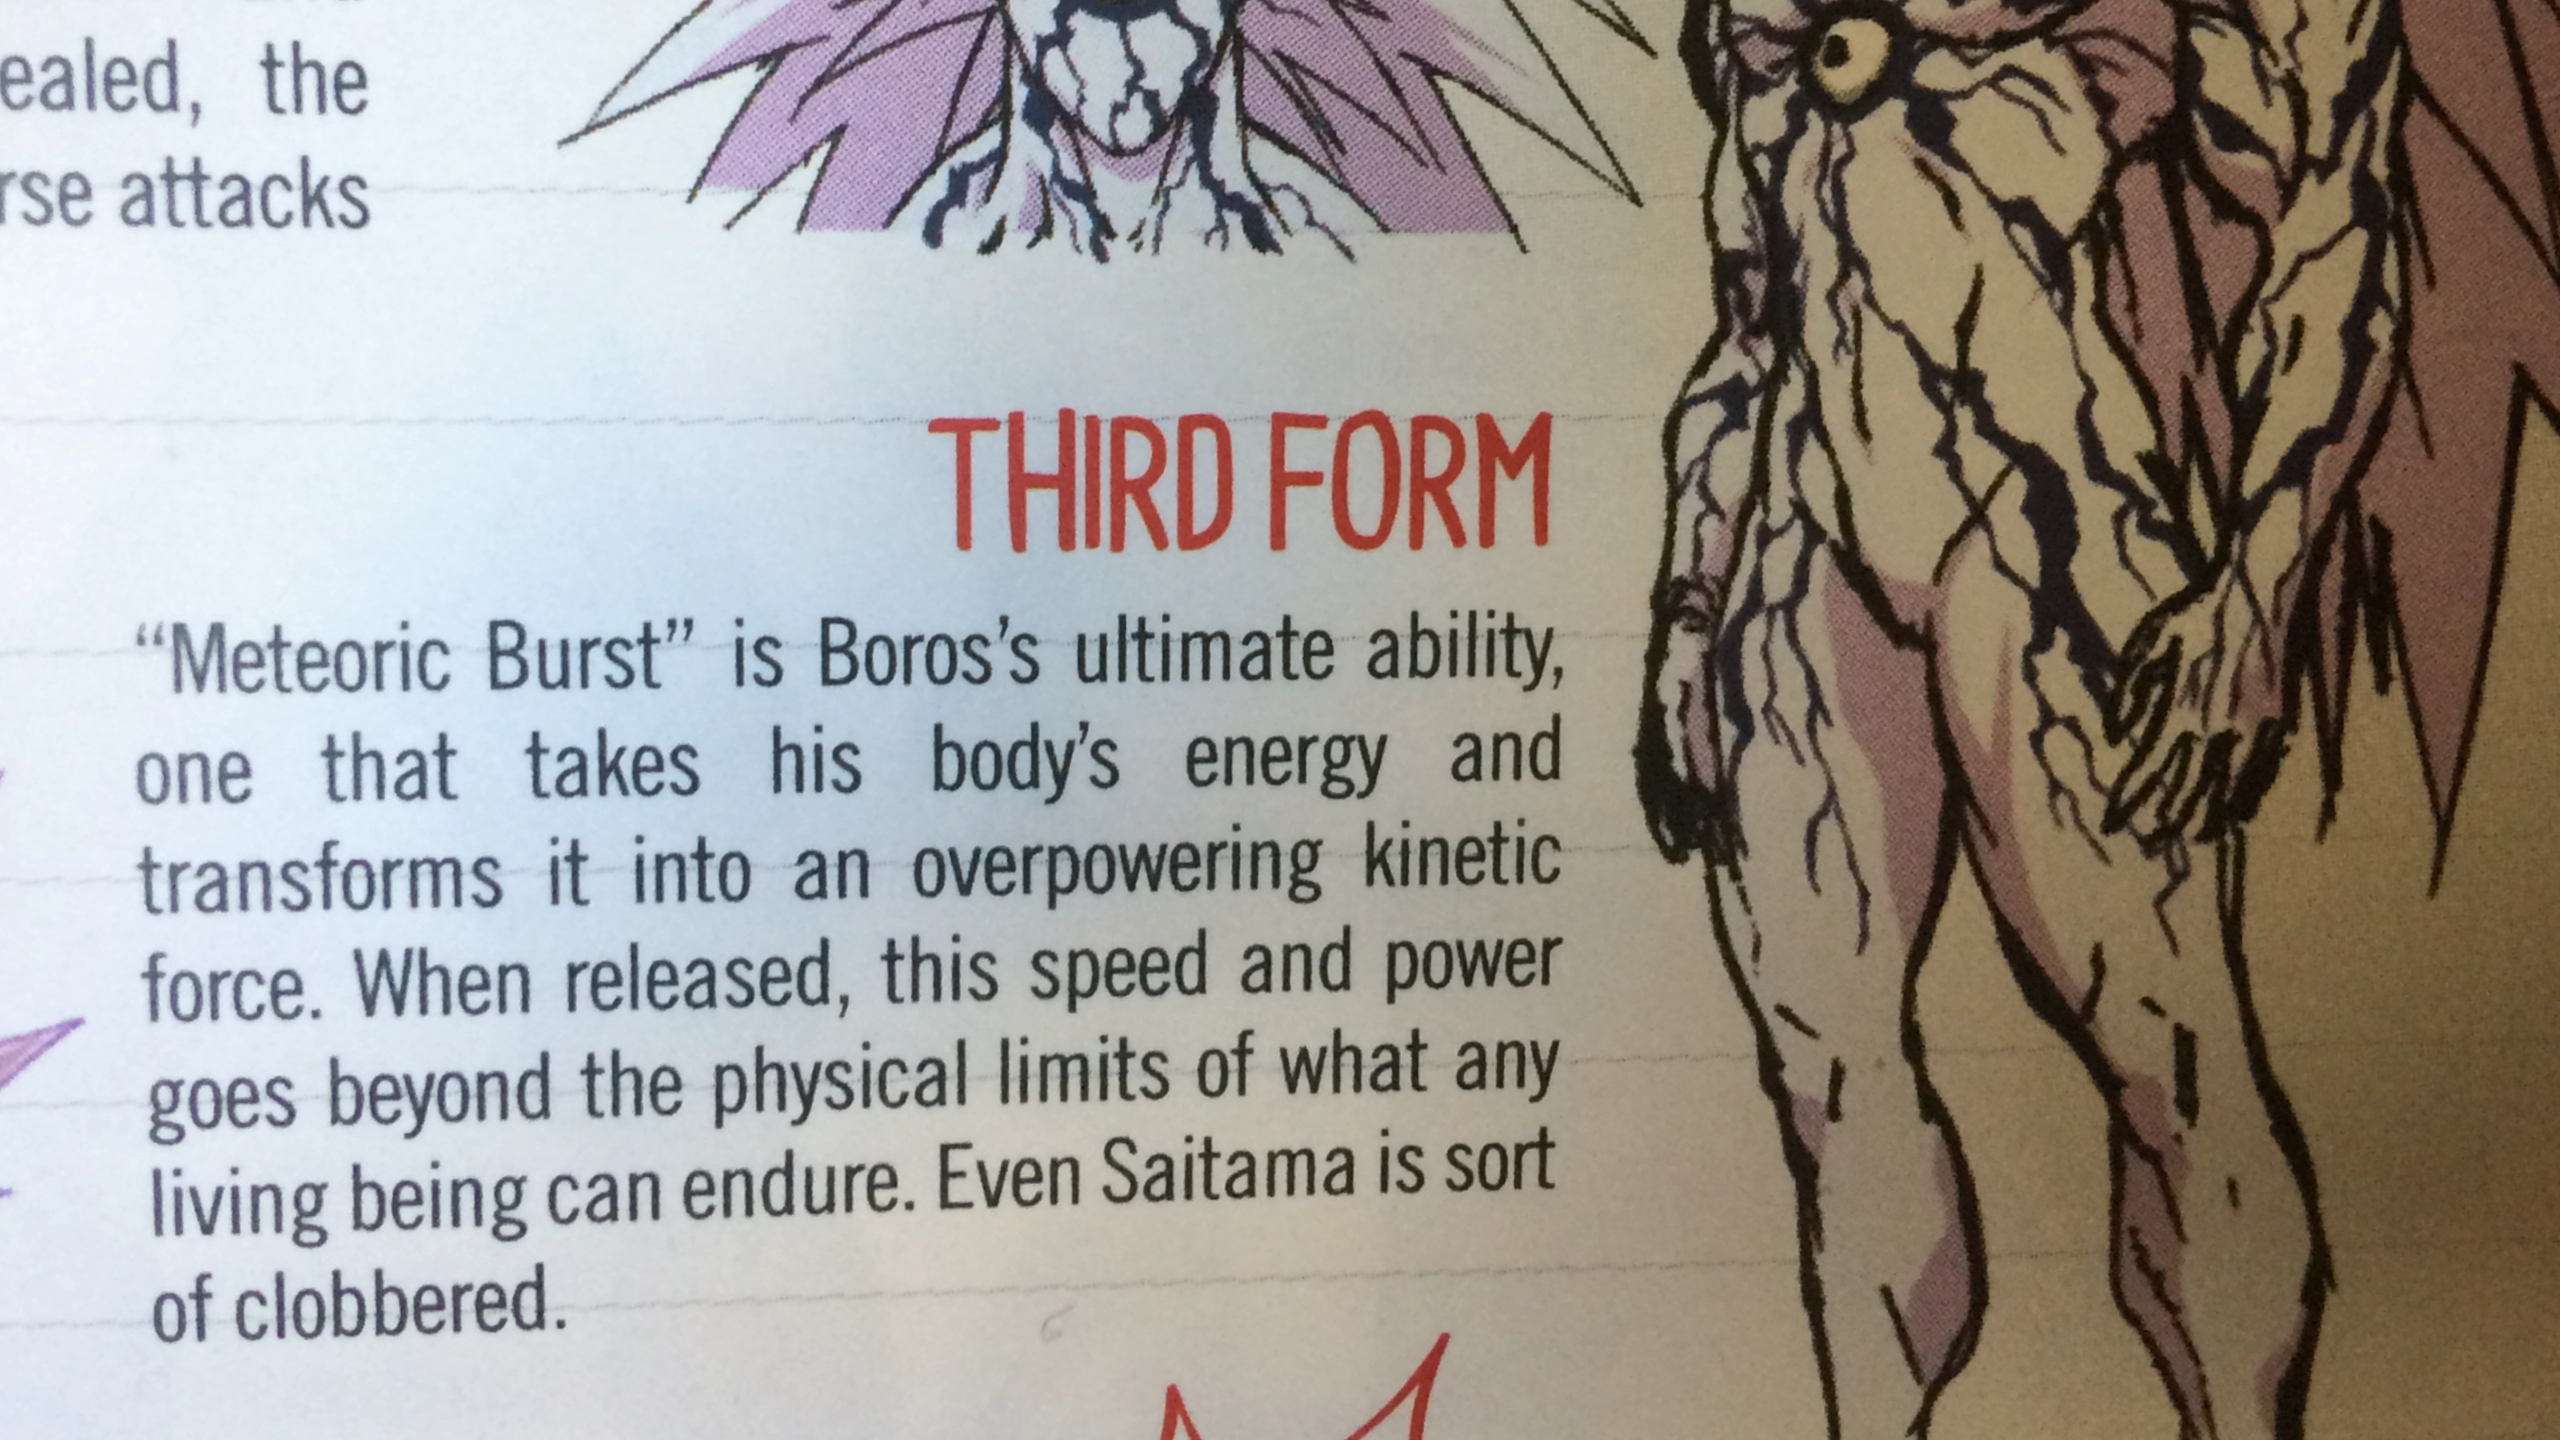 #3. Boros is a planet buster in his 1st and 2nd form and a Star buster in h...